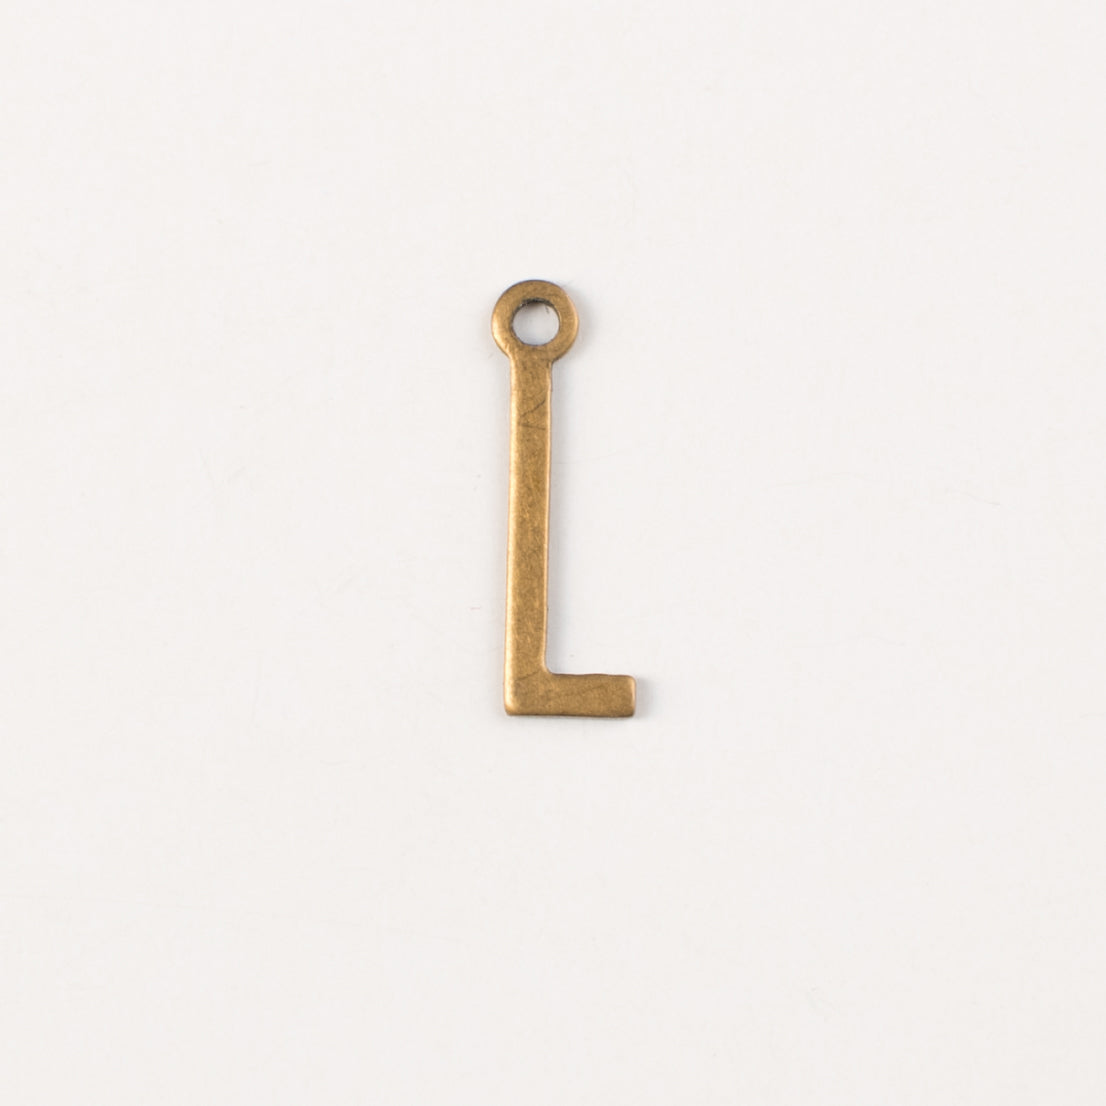 15x6mm L Letter Charm, Classic Silver, Antique Gold Metal Stamping, pk/6